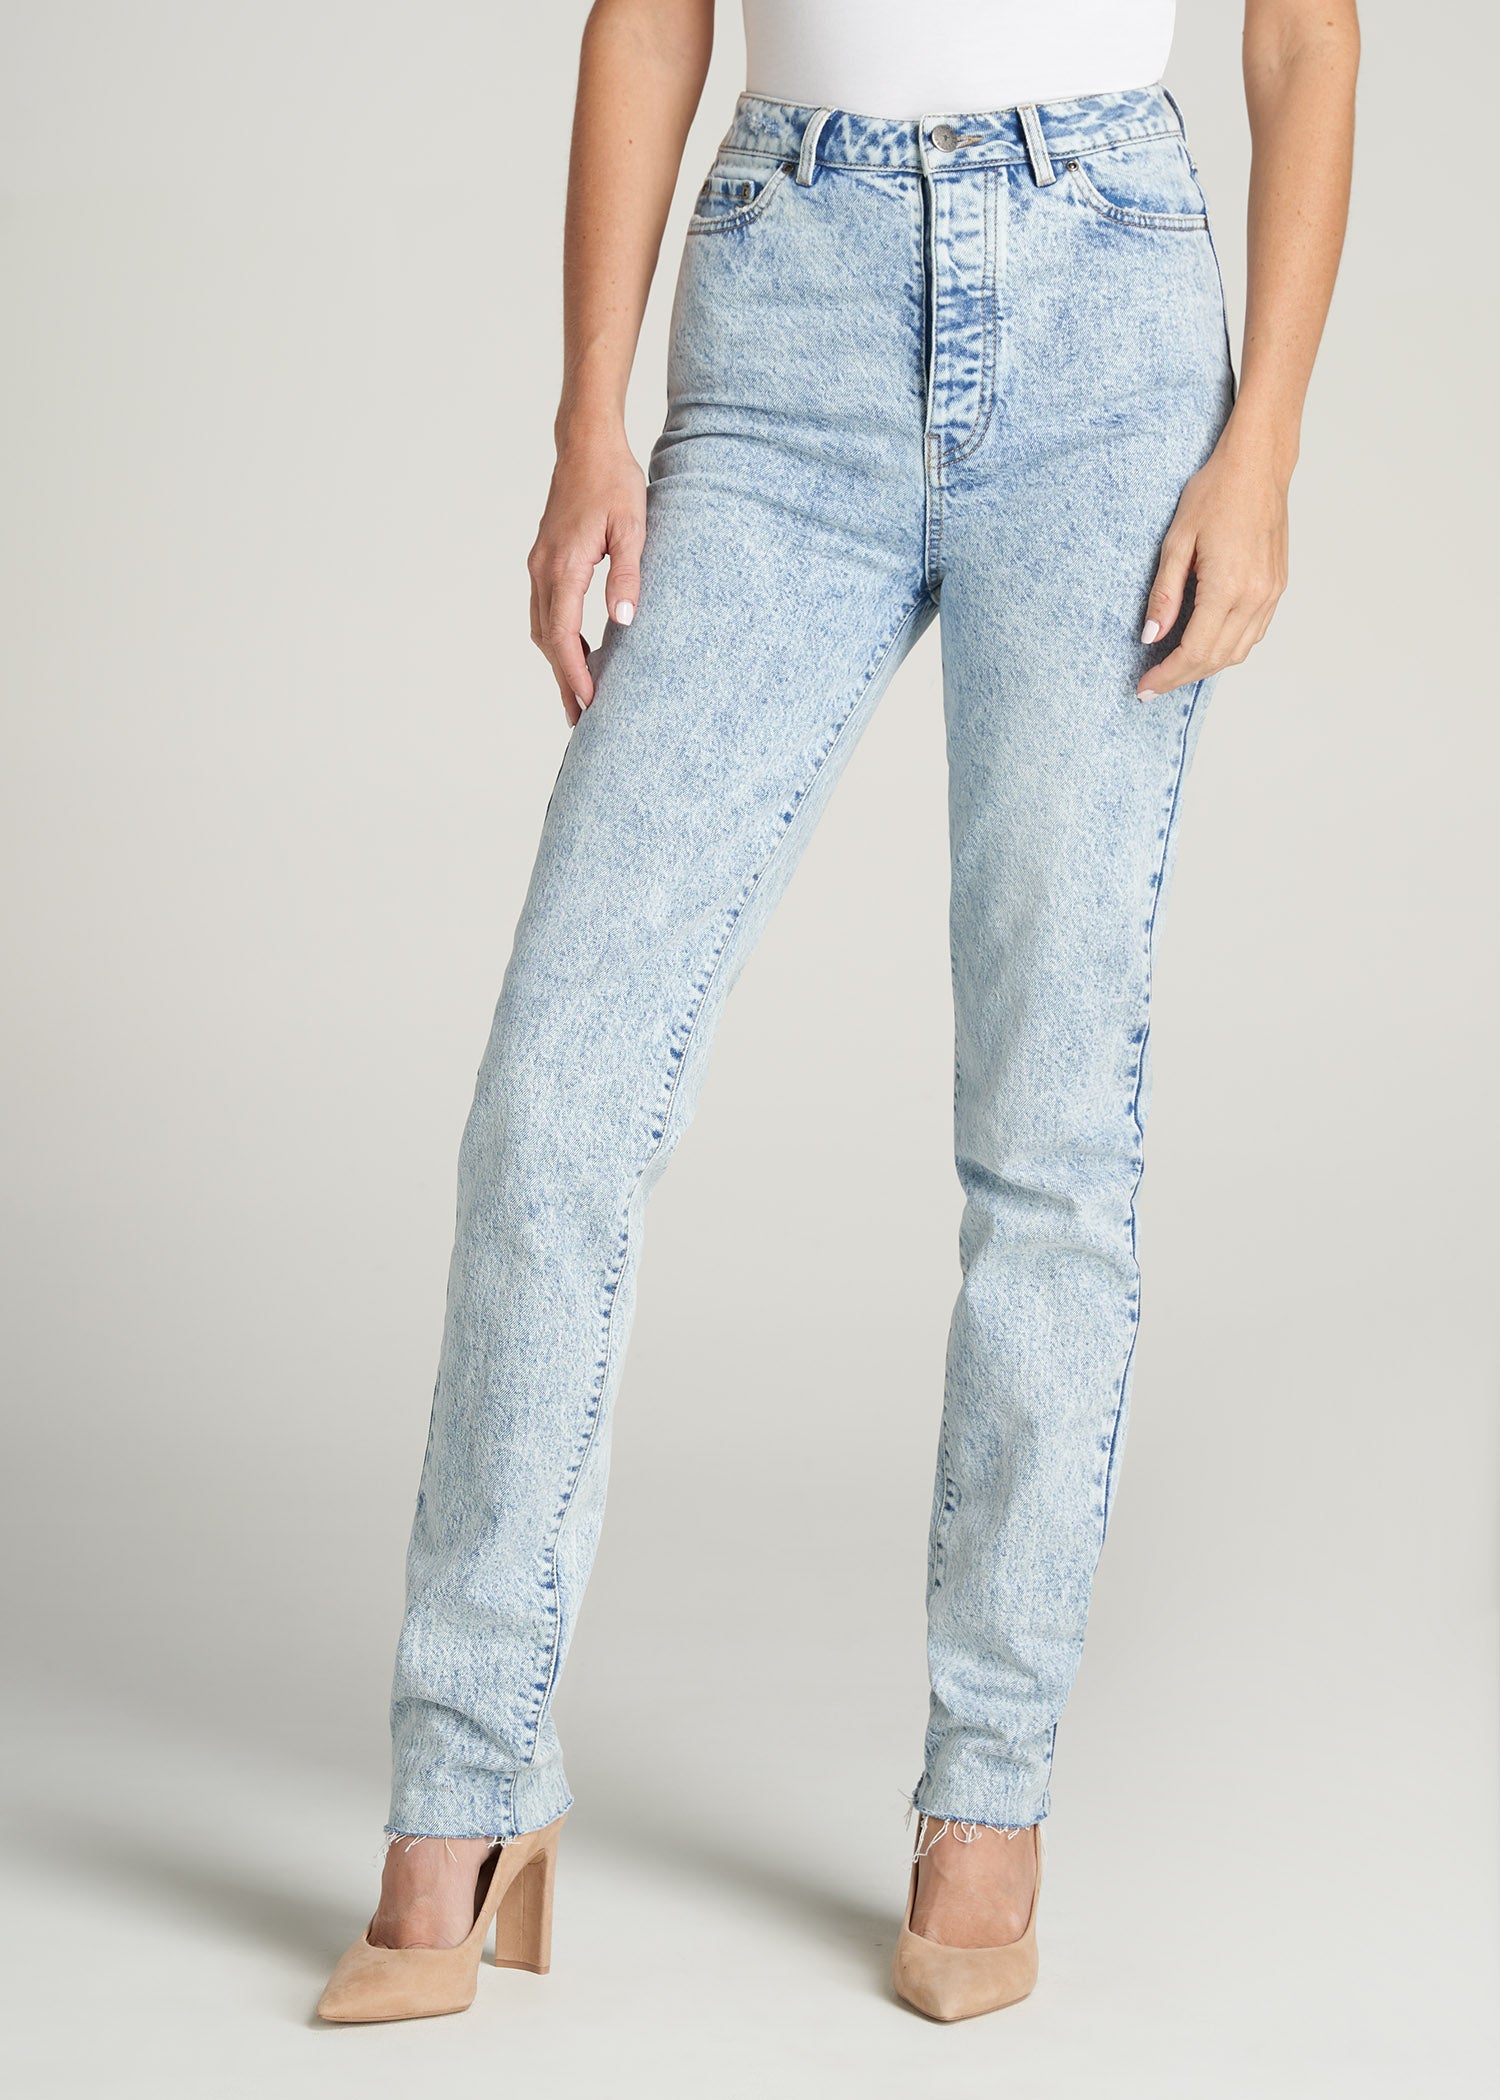 Stone Washed Jeans for Tall Women Lola Stretch – American Tall